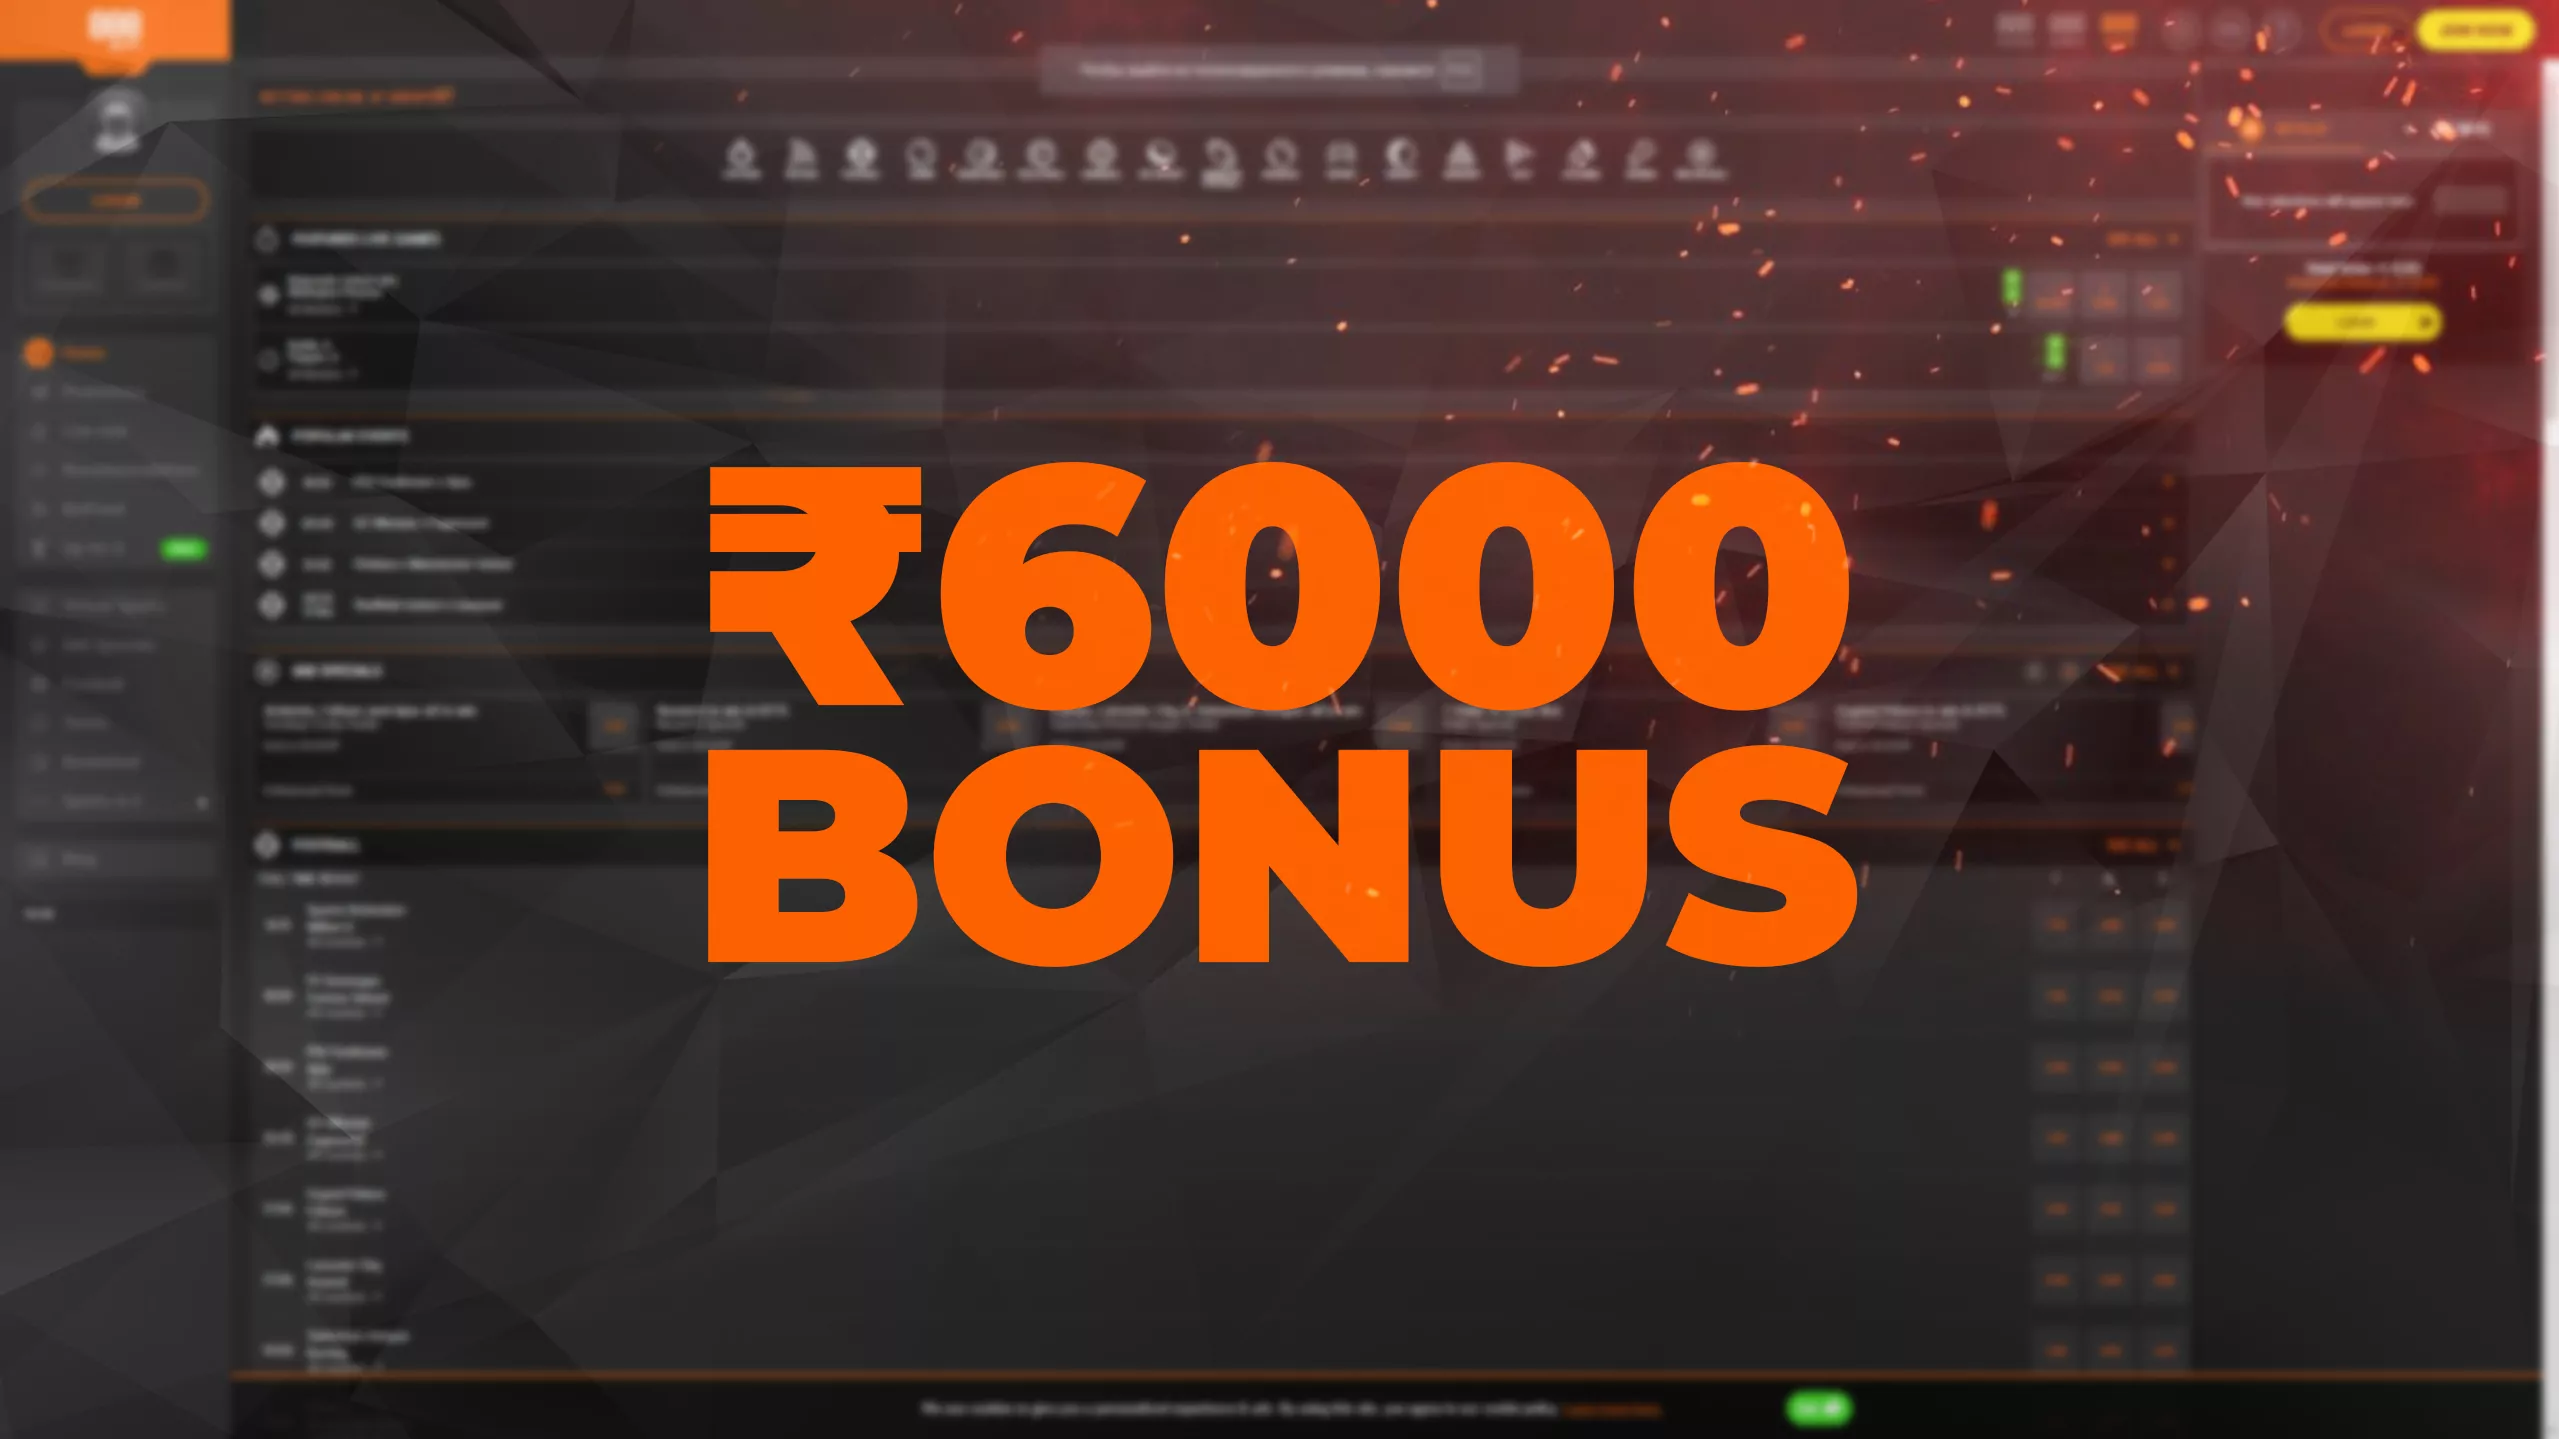 But still this bonus can help you to place a winnig bet on cricket.